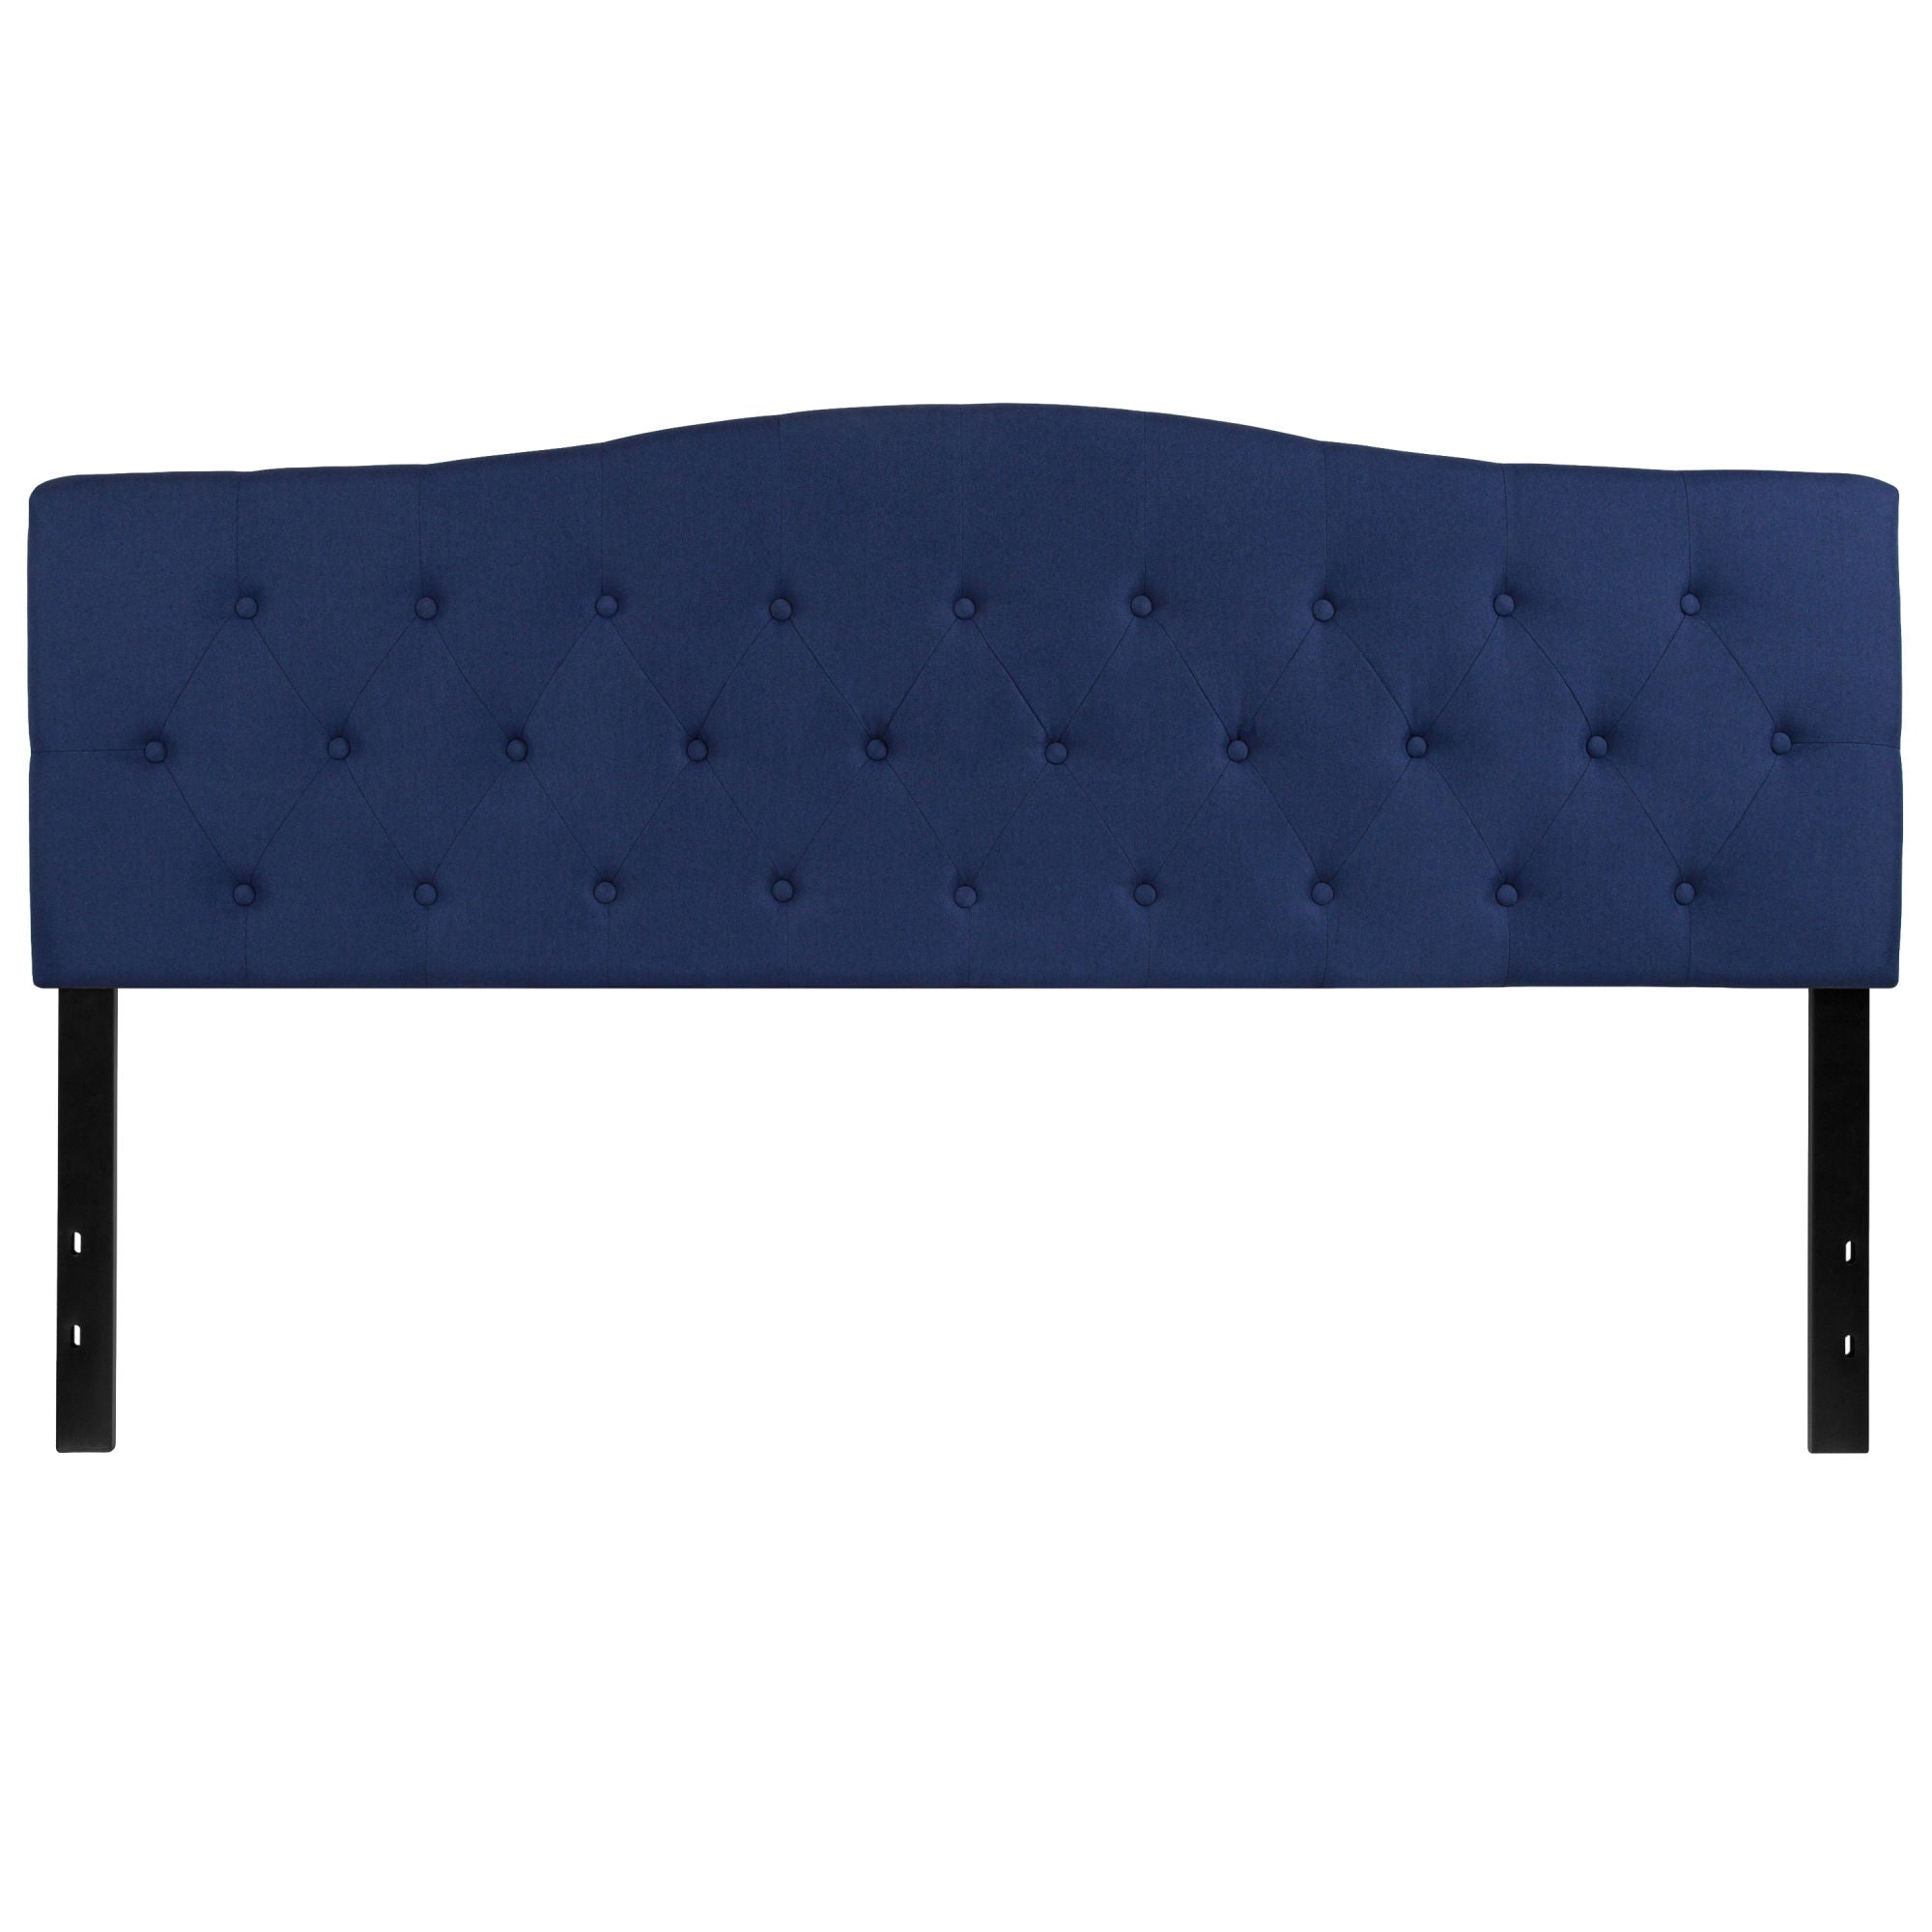 Arched Button Tufted Upholstered Headboard